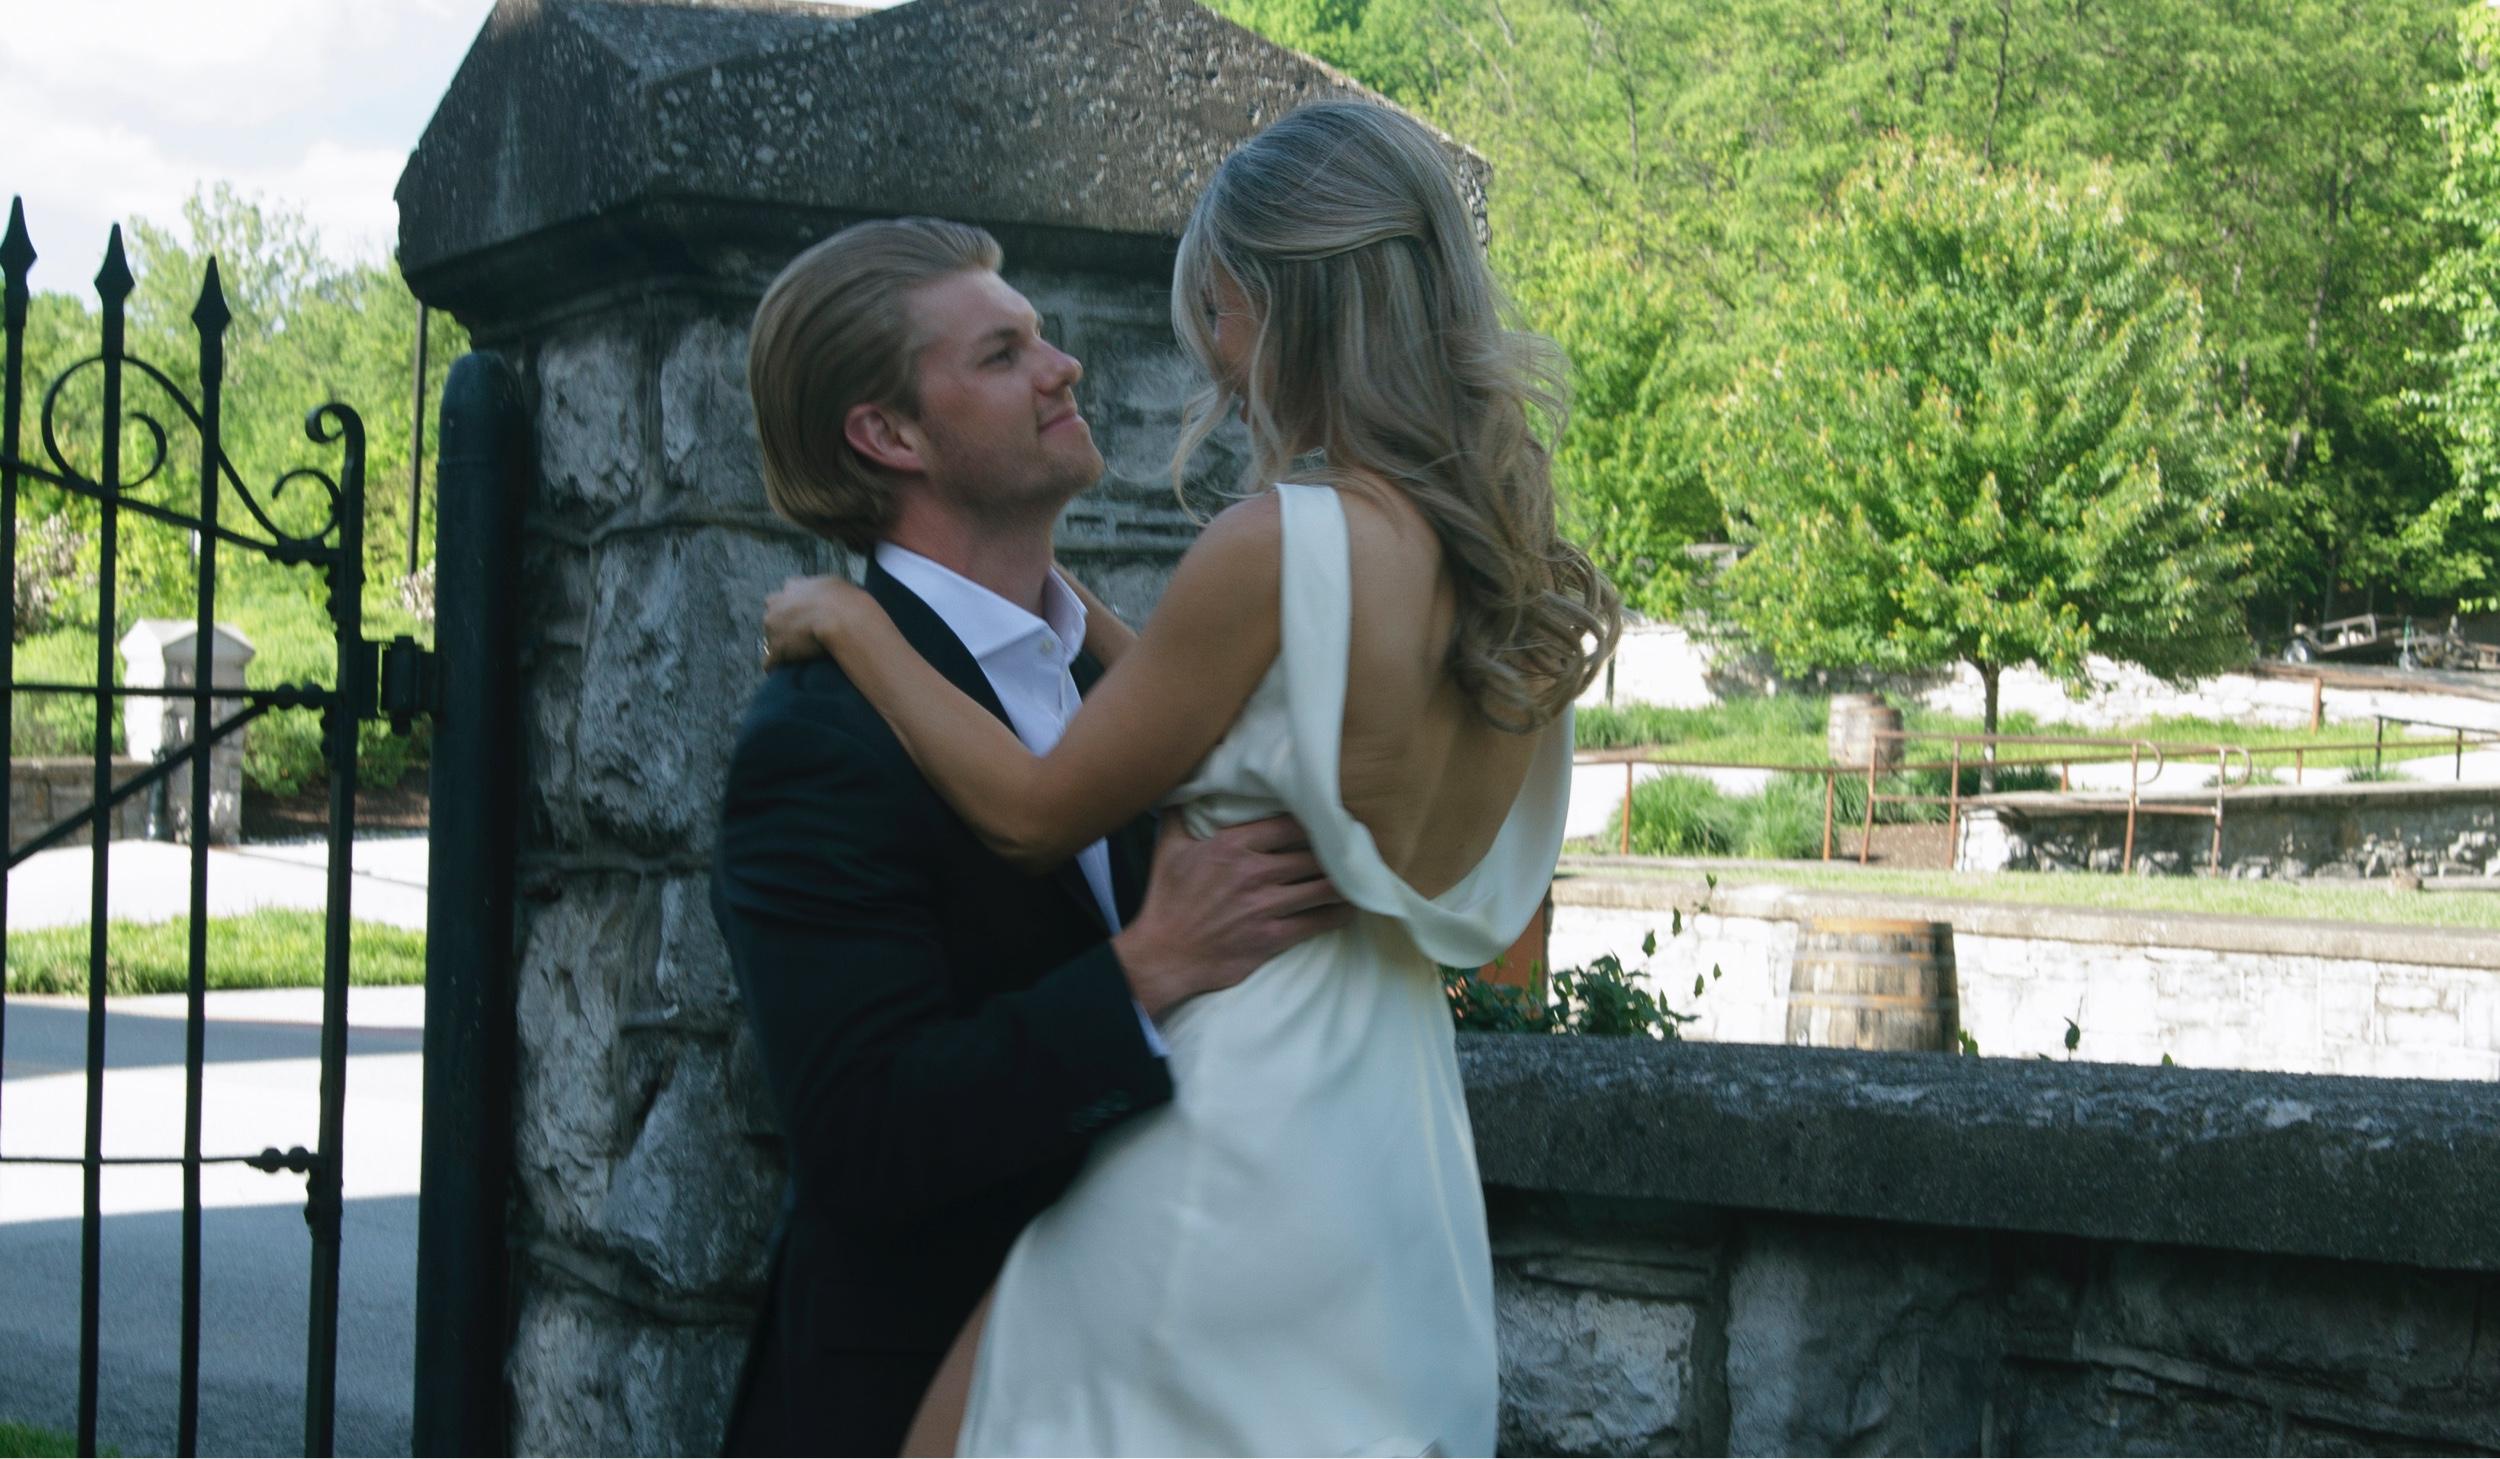 The Wedding Website of Alex Beyer and Candace Godin